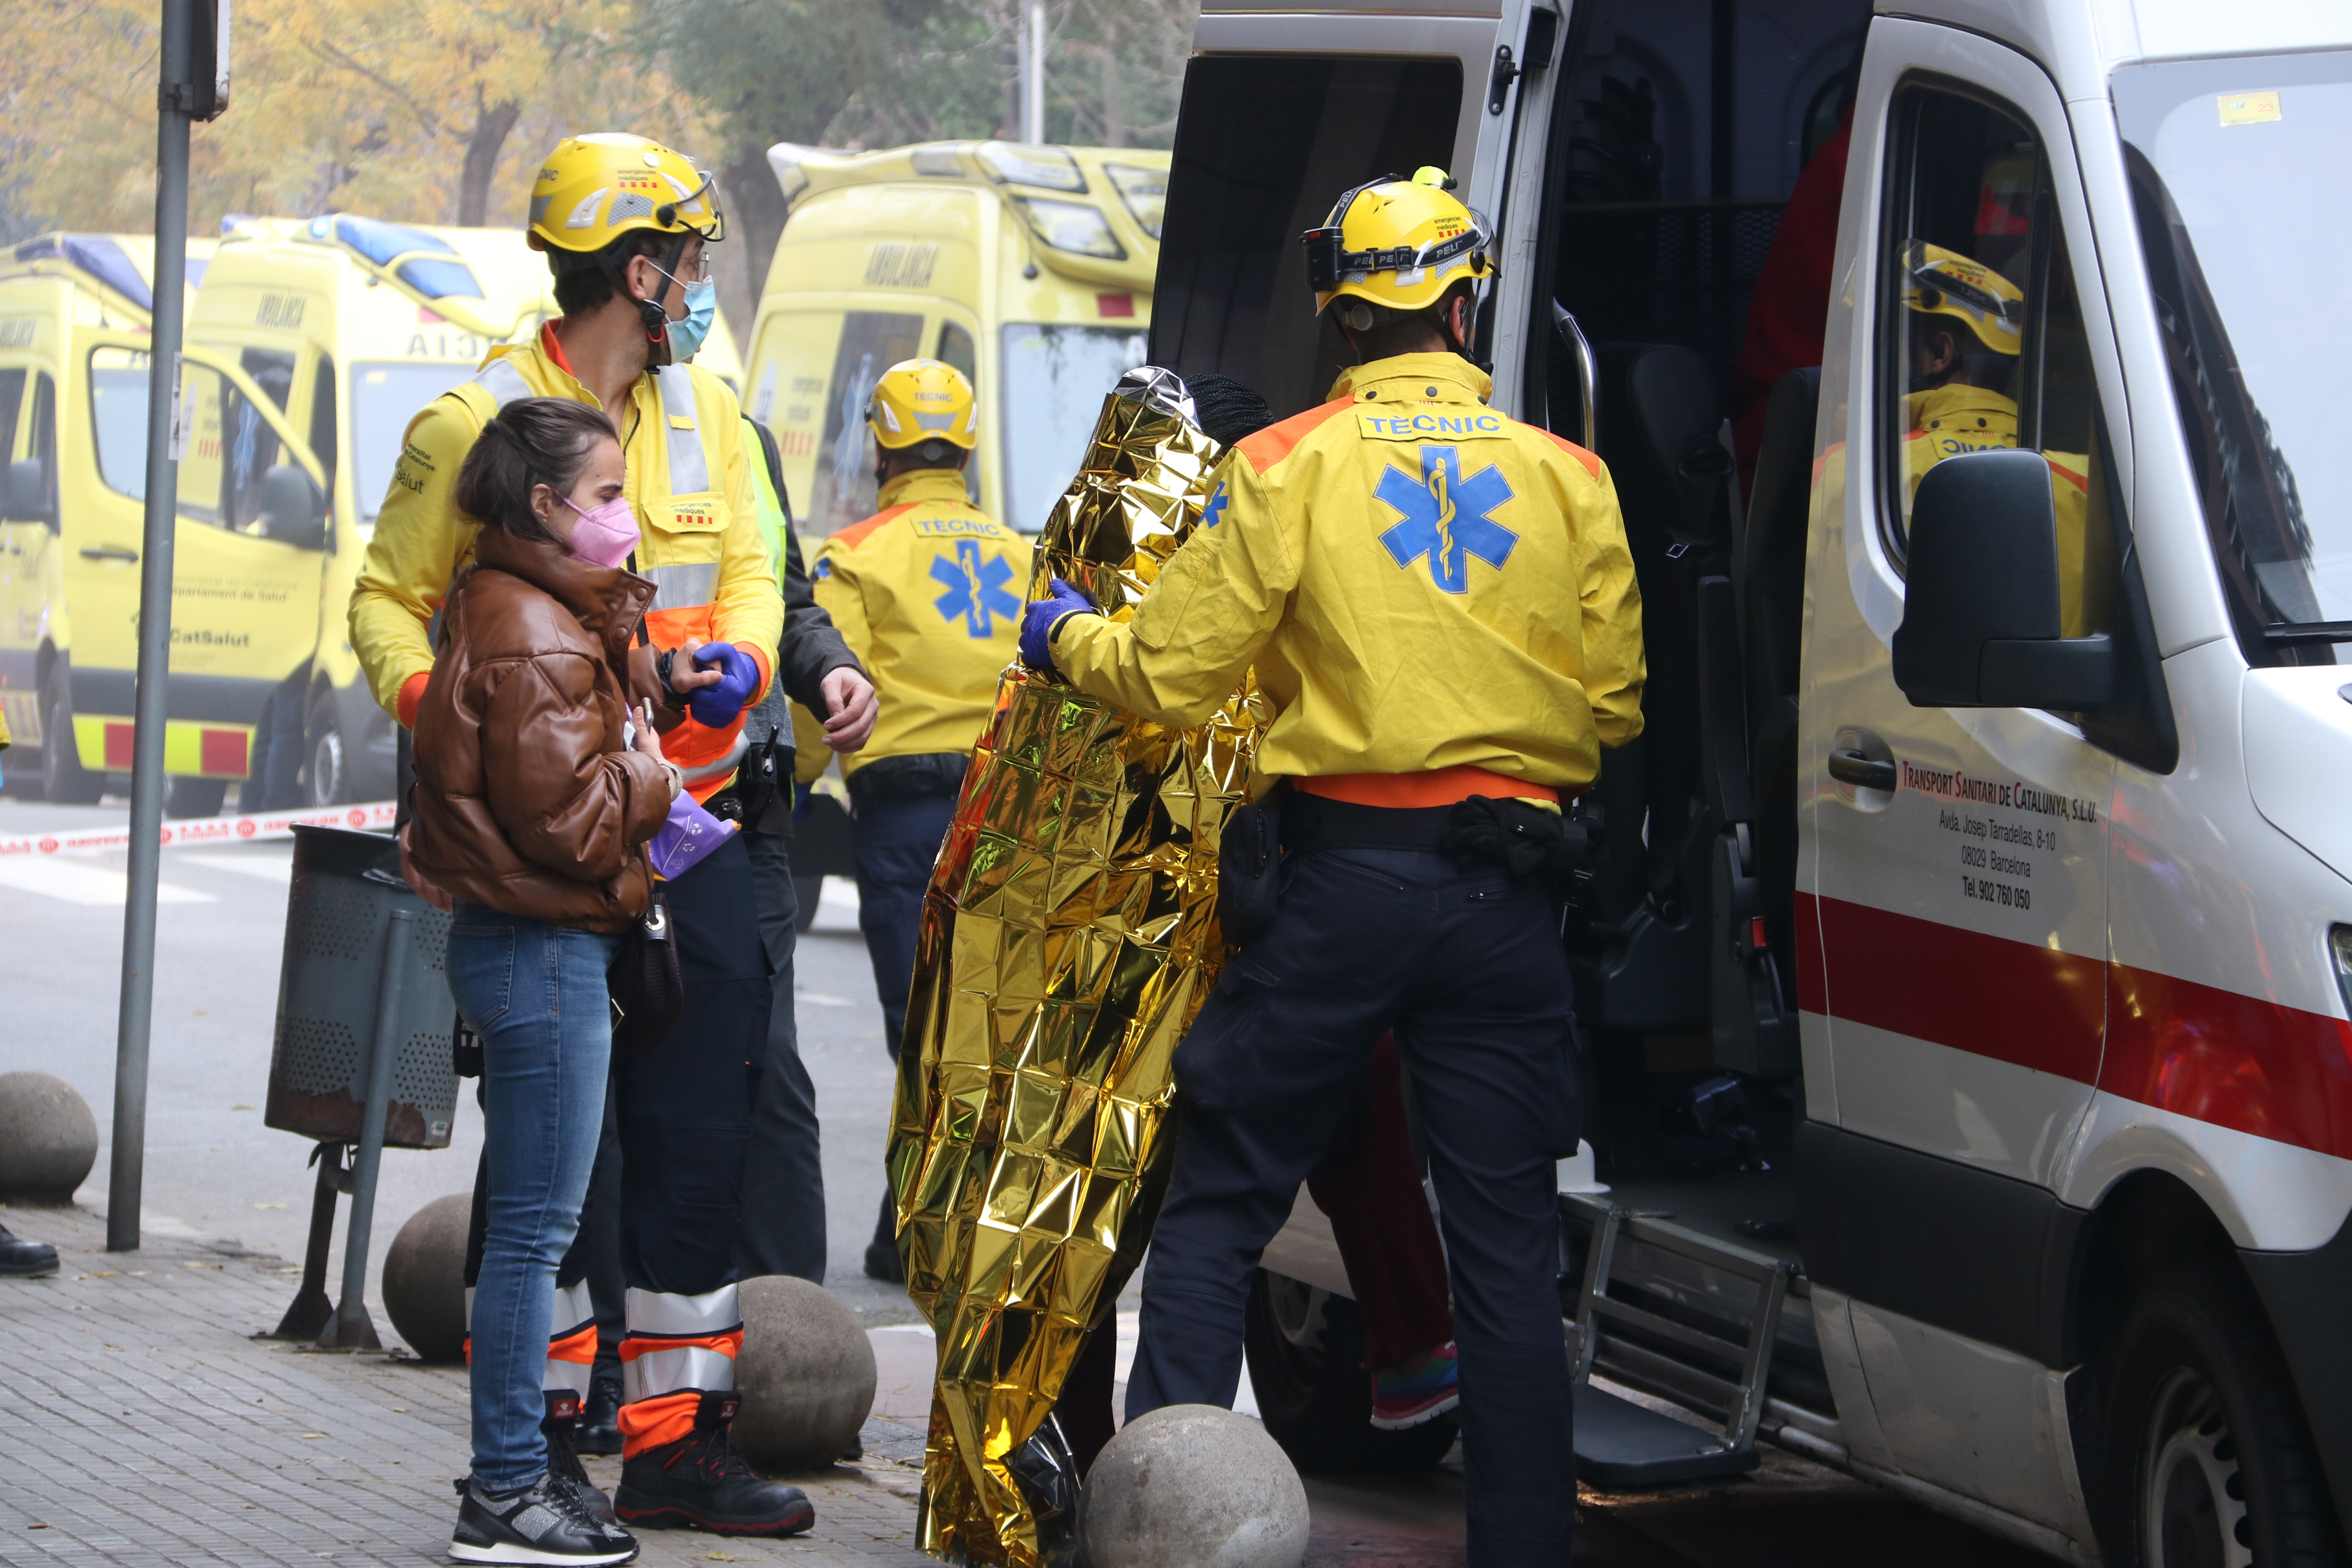 Medical emergency services aid victims of the collision between two trains at the Montcada i Reixac Manresa station, just north of Barcelona, on December 7, 2022